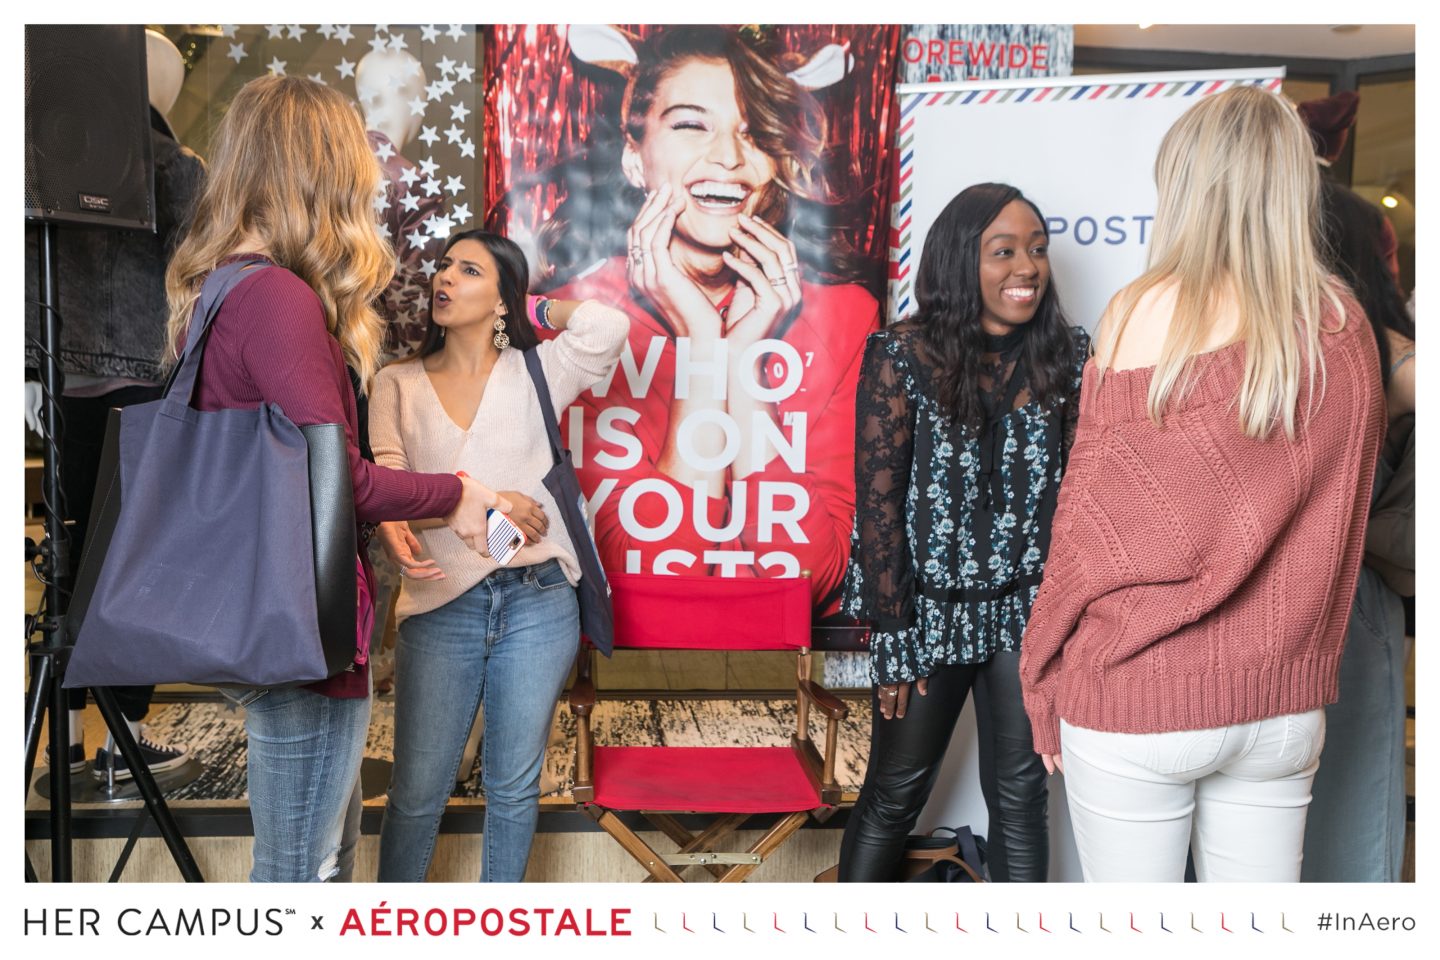 Jordan Taylor C - Prepping for Winter at the Her Campus x Aeropostale Event 